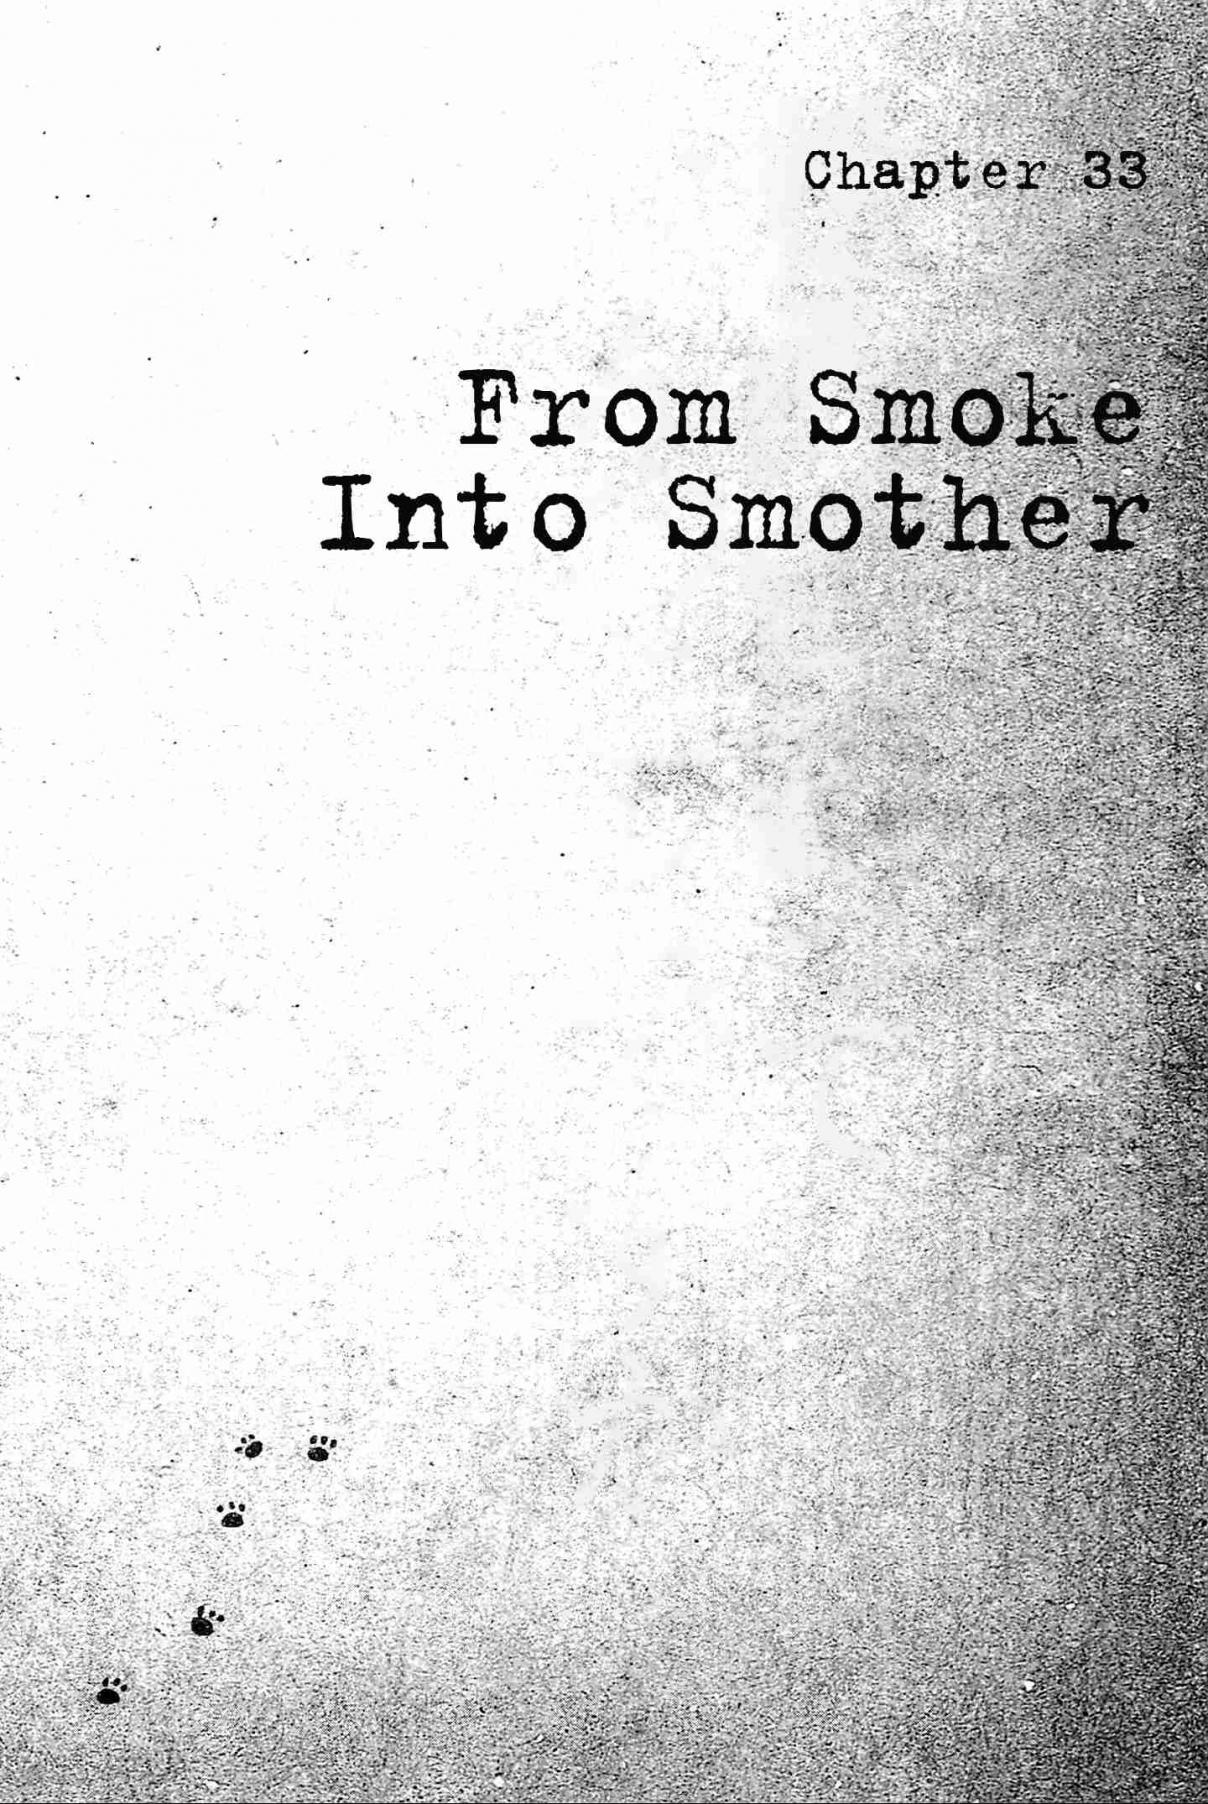 Guns and Stamps Vol. 4 Ch. 33 From Smoke Into Smother